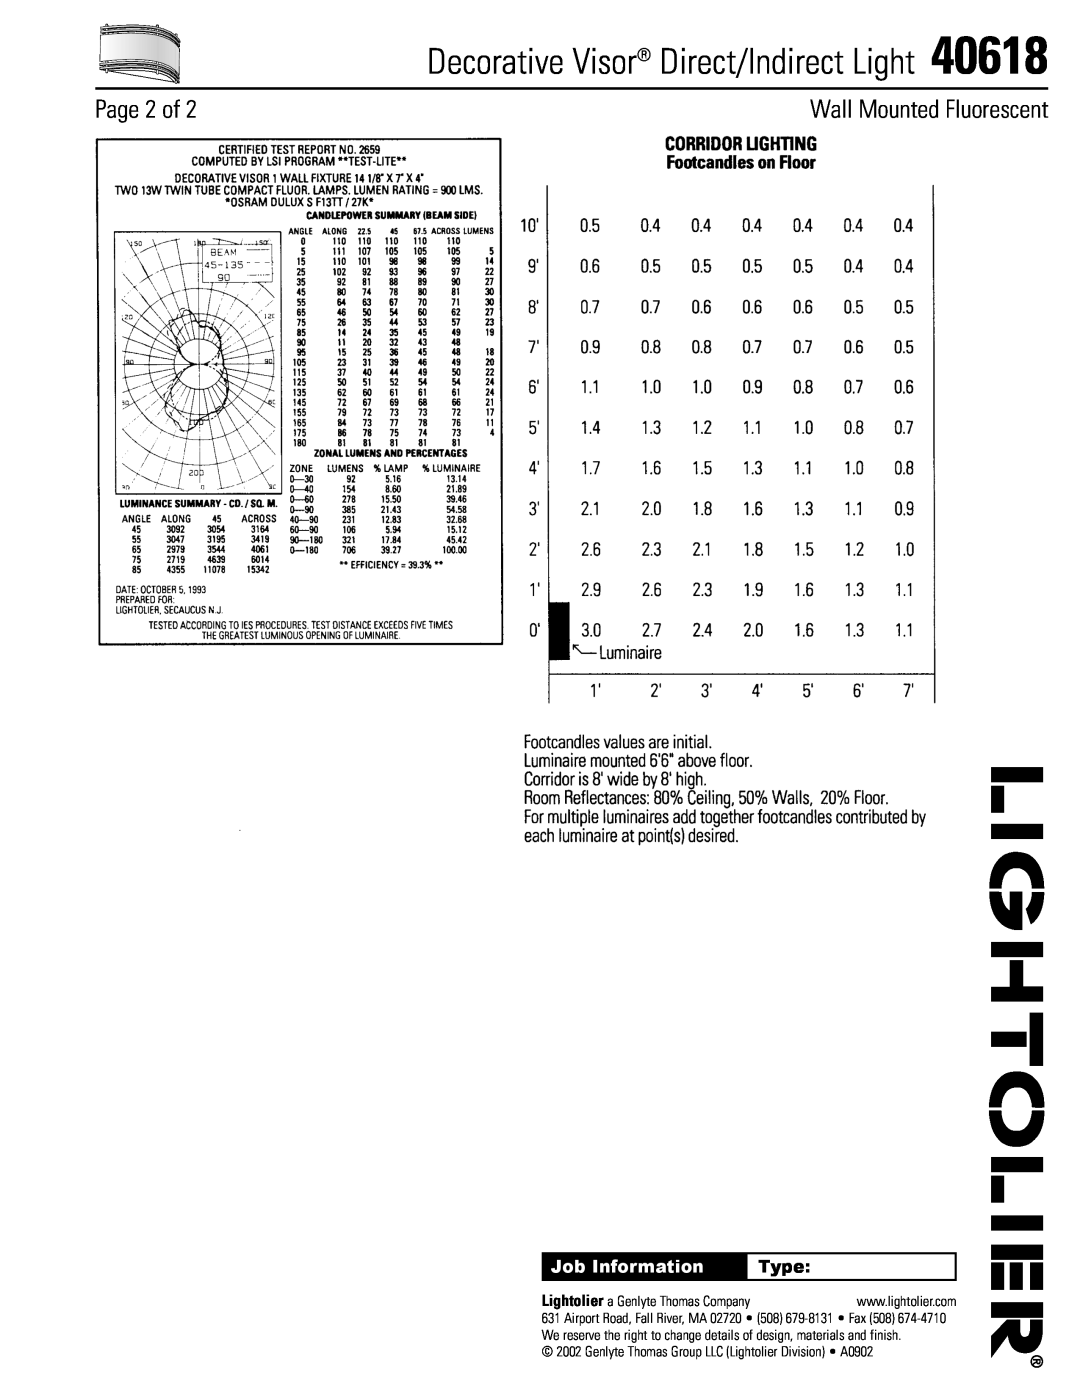 Lightolier 40618 manual Page 2 of, Type, Decorative Visor Direct/Indirect Light, Wall Mounted Fluorescent, Job Information 